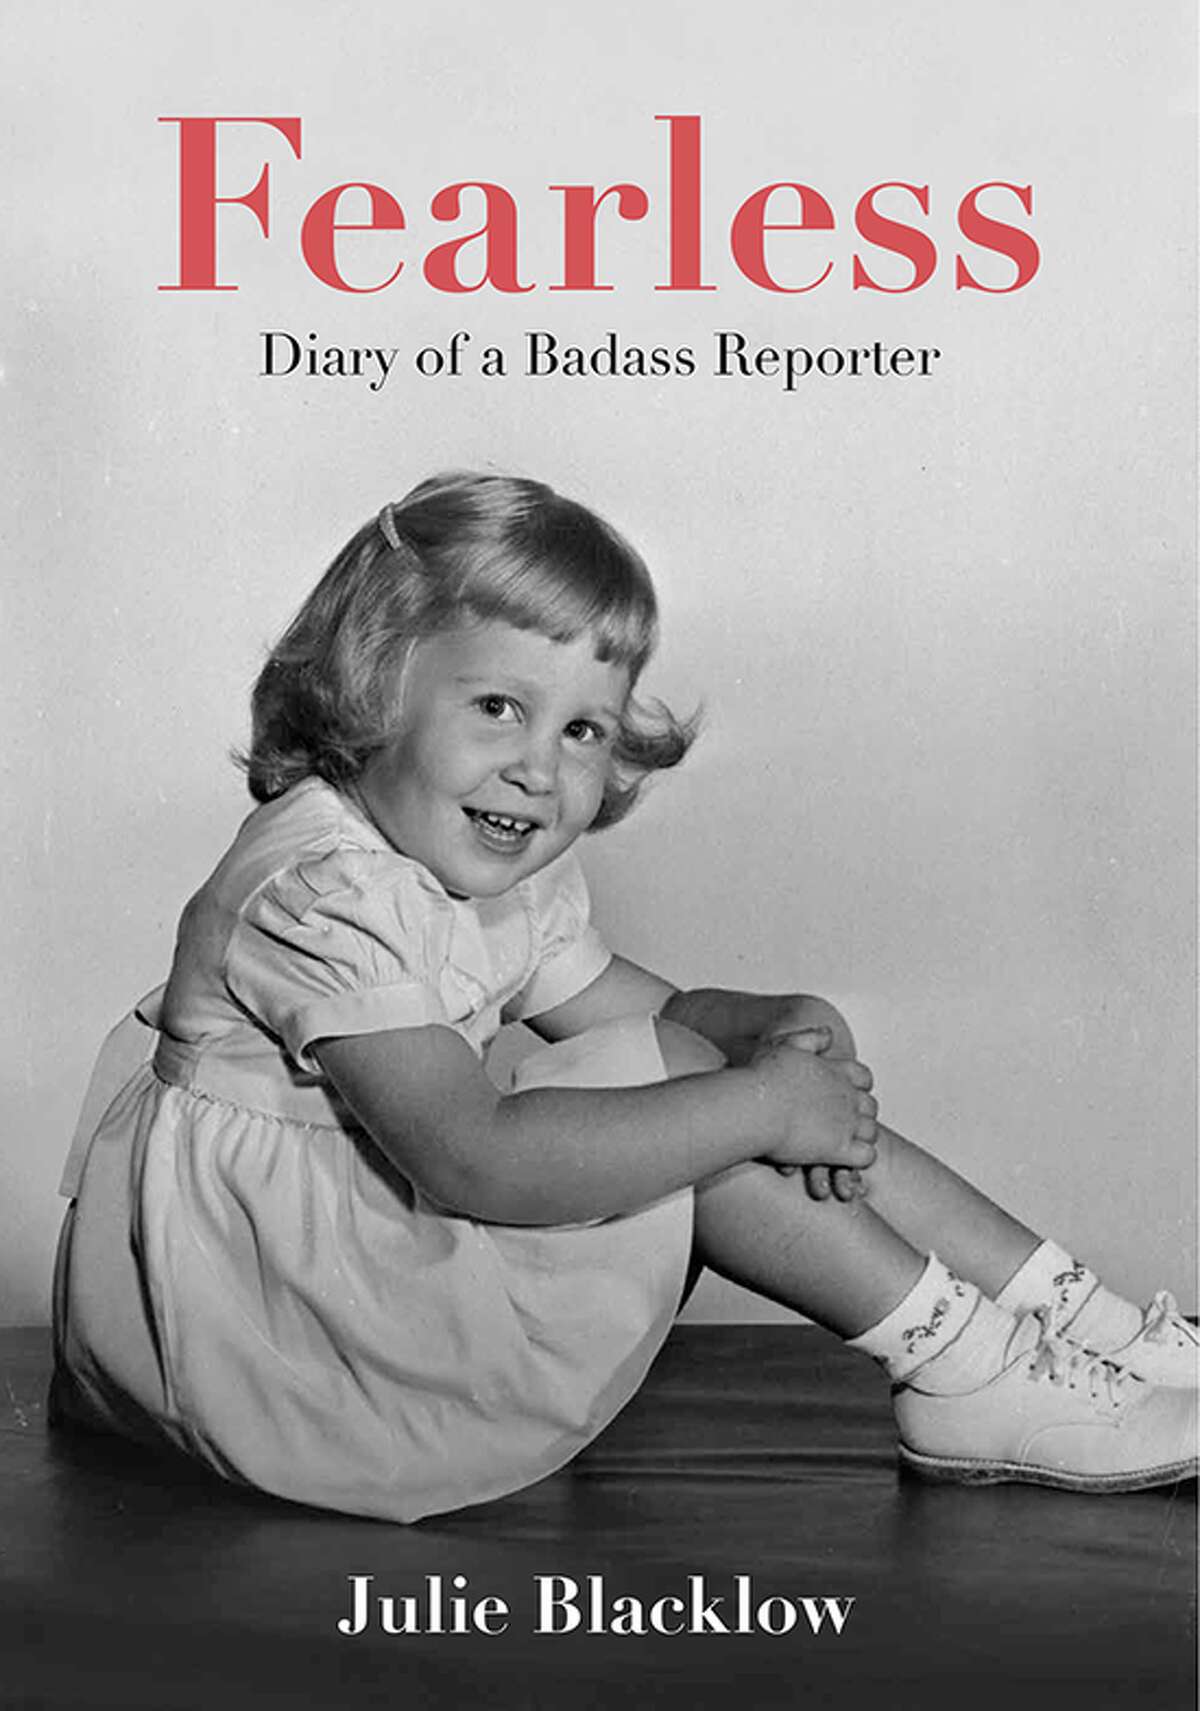 Fearless: Diary of a badass reporter is available to purchase at this link.